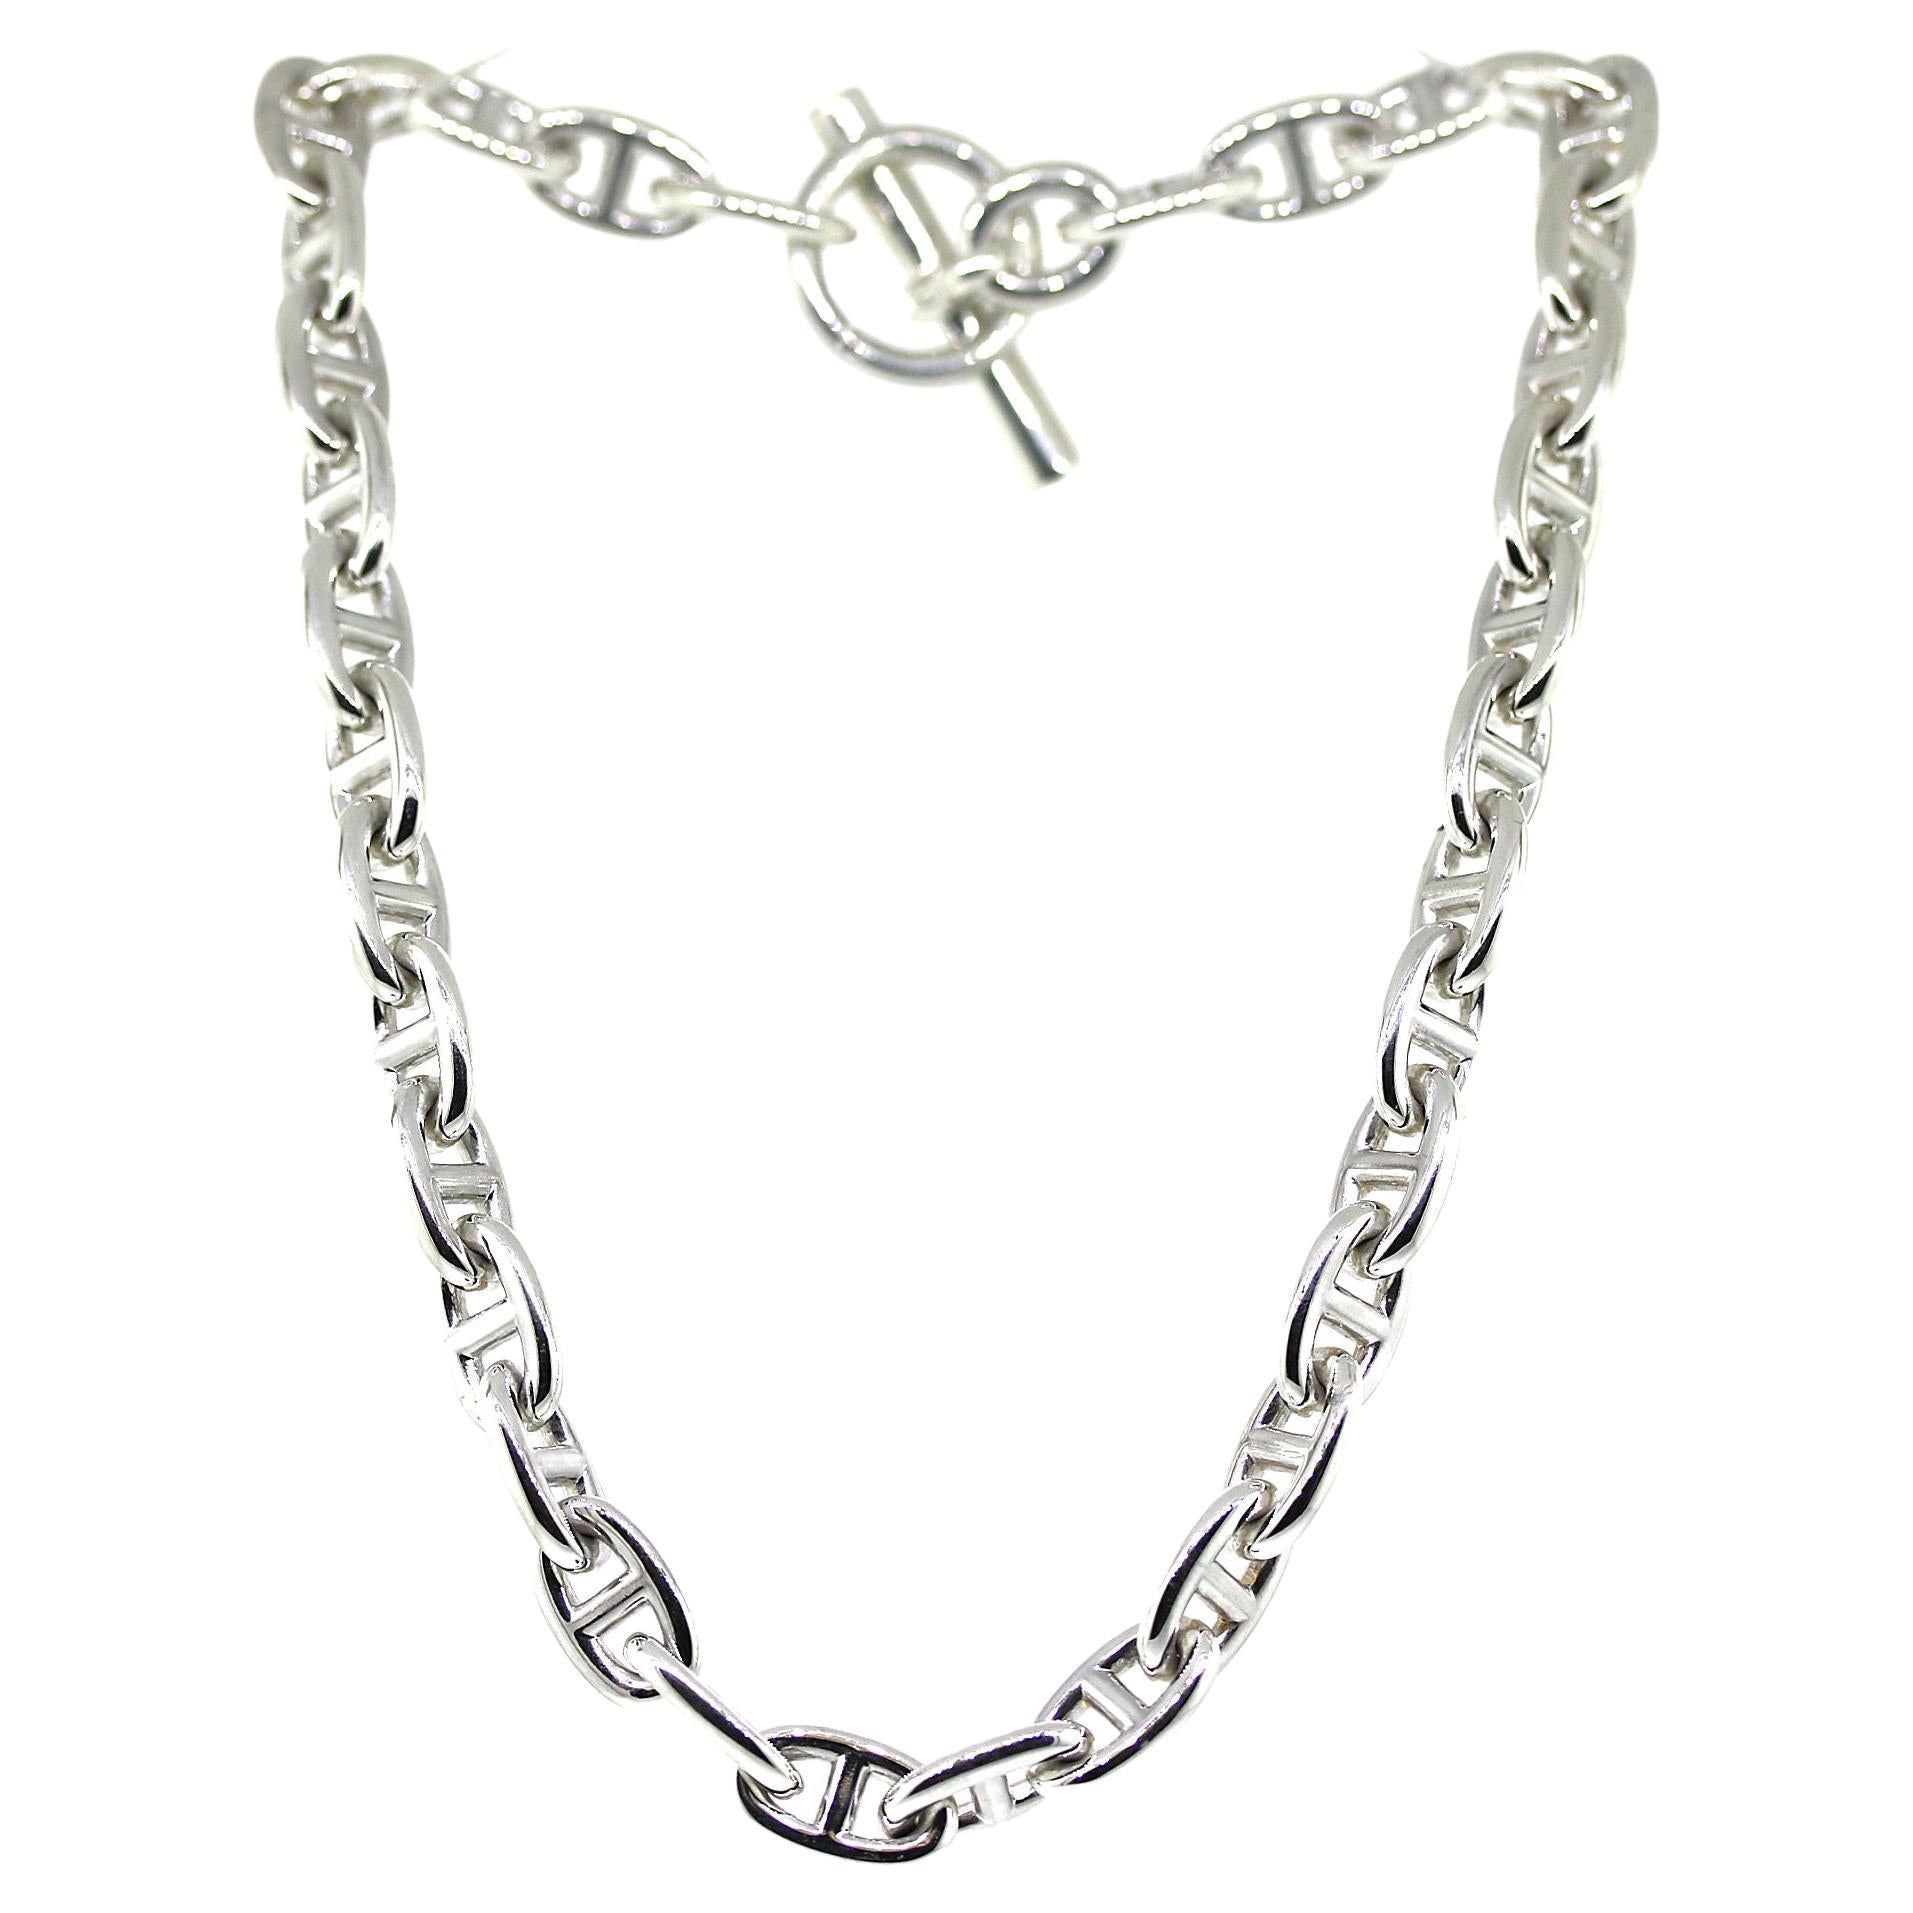 Hermes Chaine D'Ancre Sterling Silver Necklace